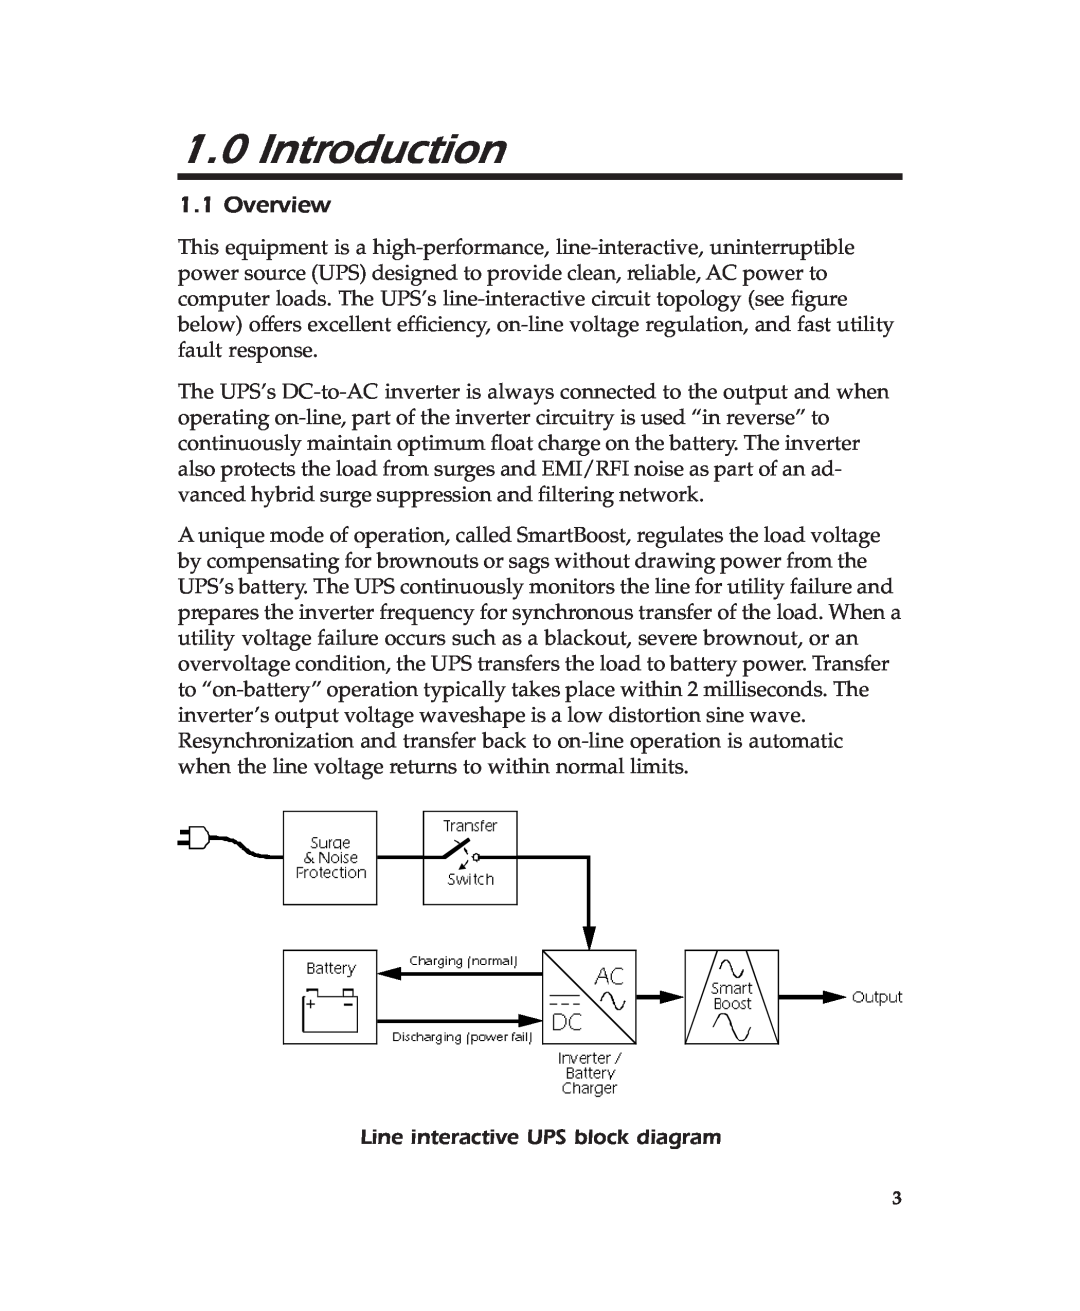 APC 600 user manual 1.0Introduction, 1.1Overview 